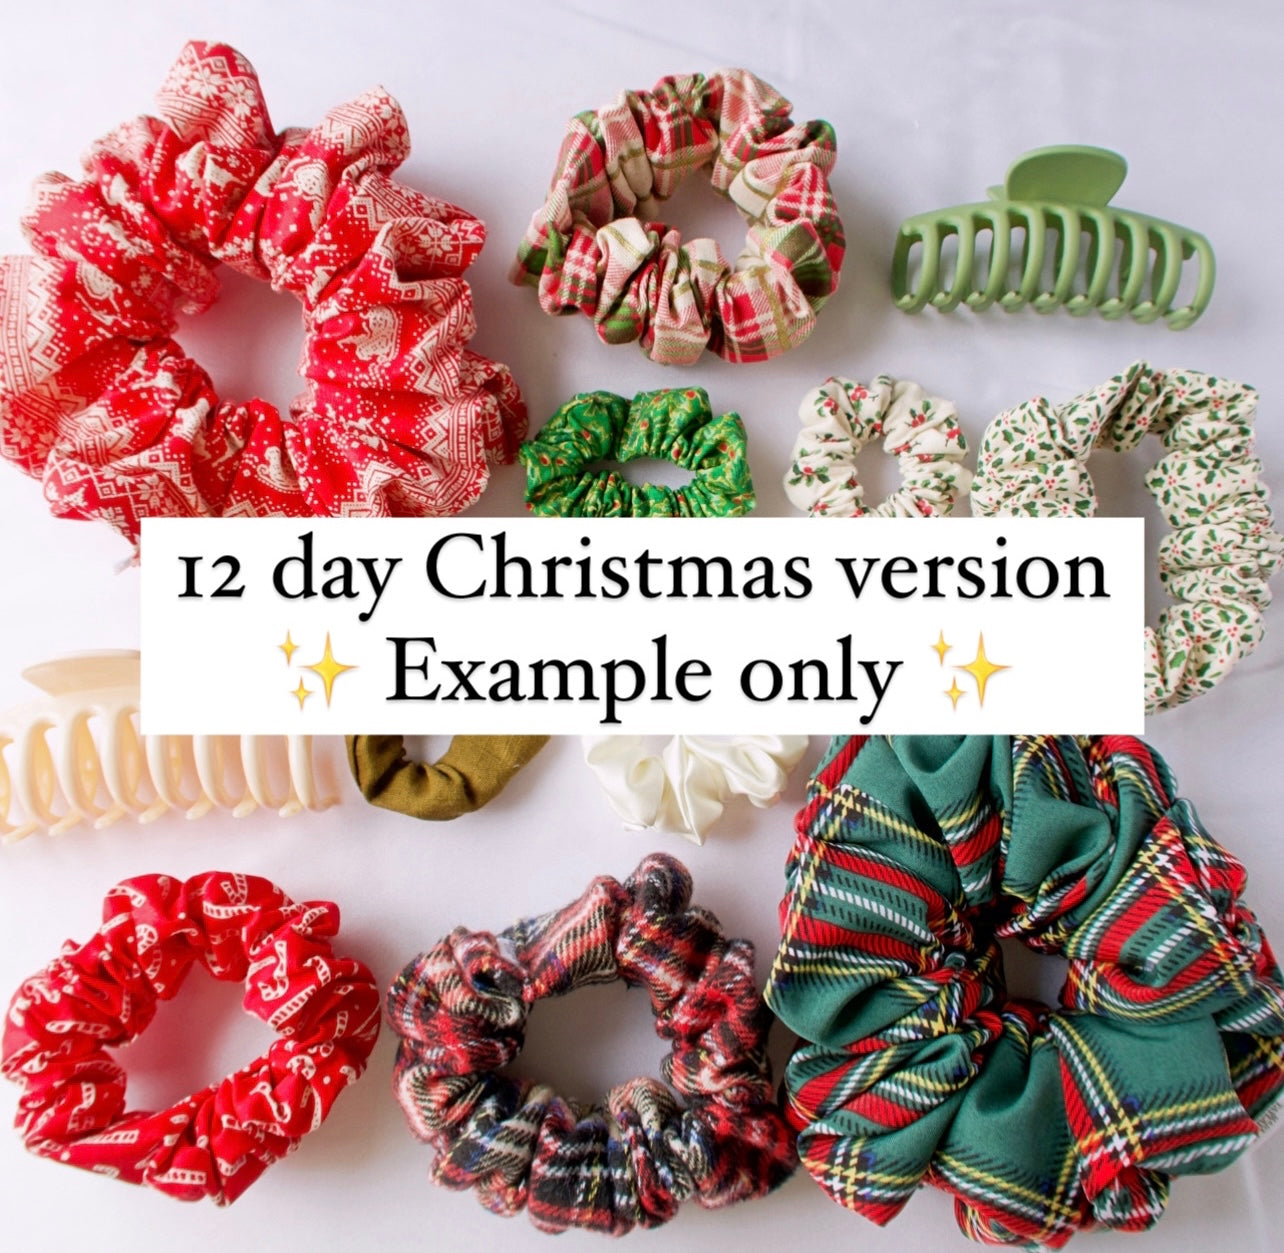 Scrunchie Advent Calendar - 12 and 24 day